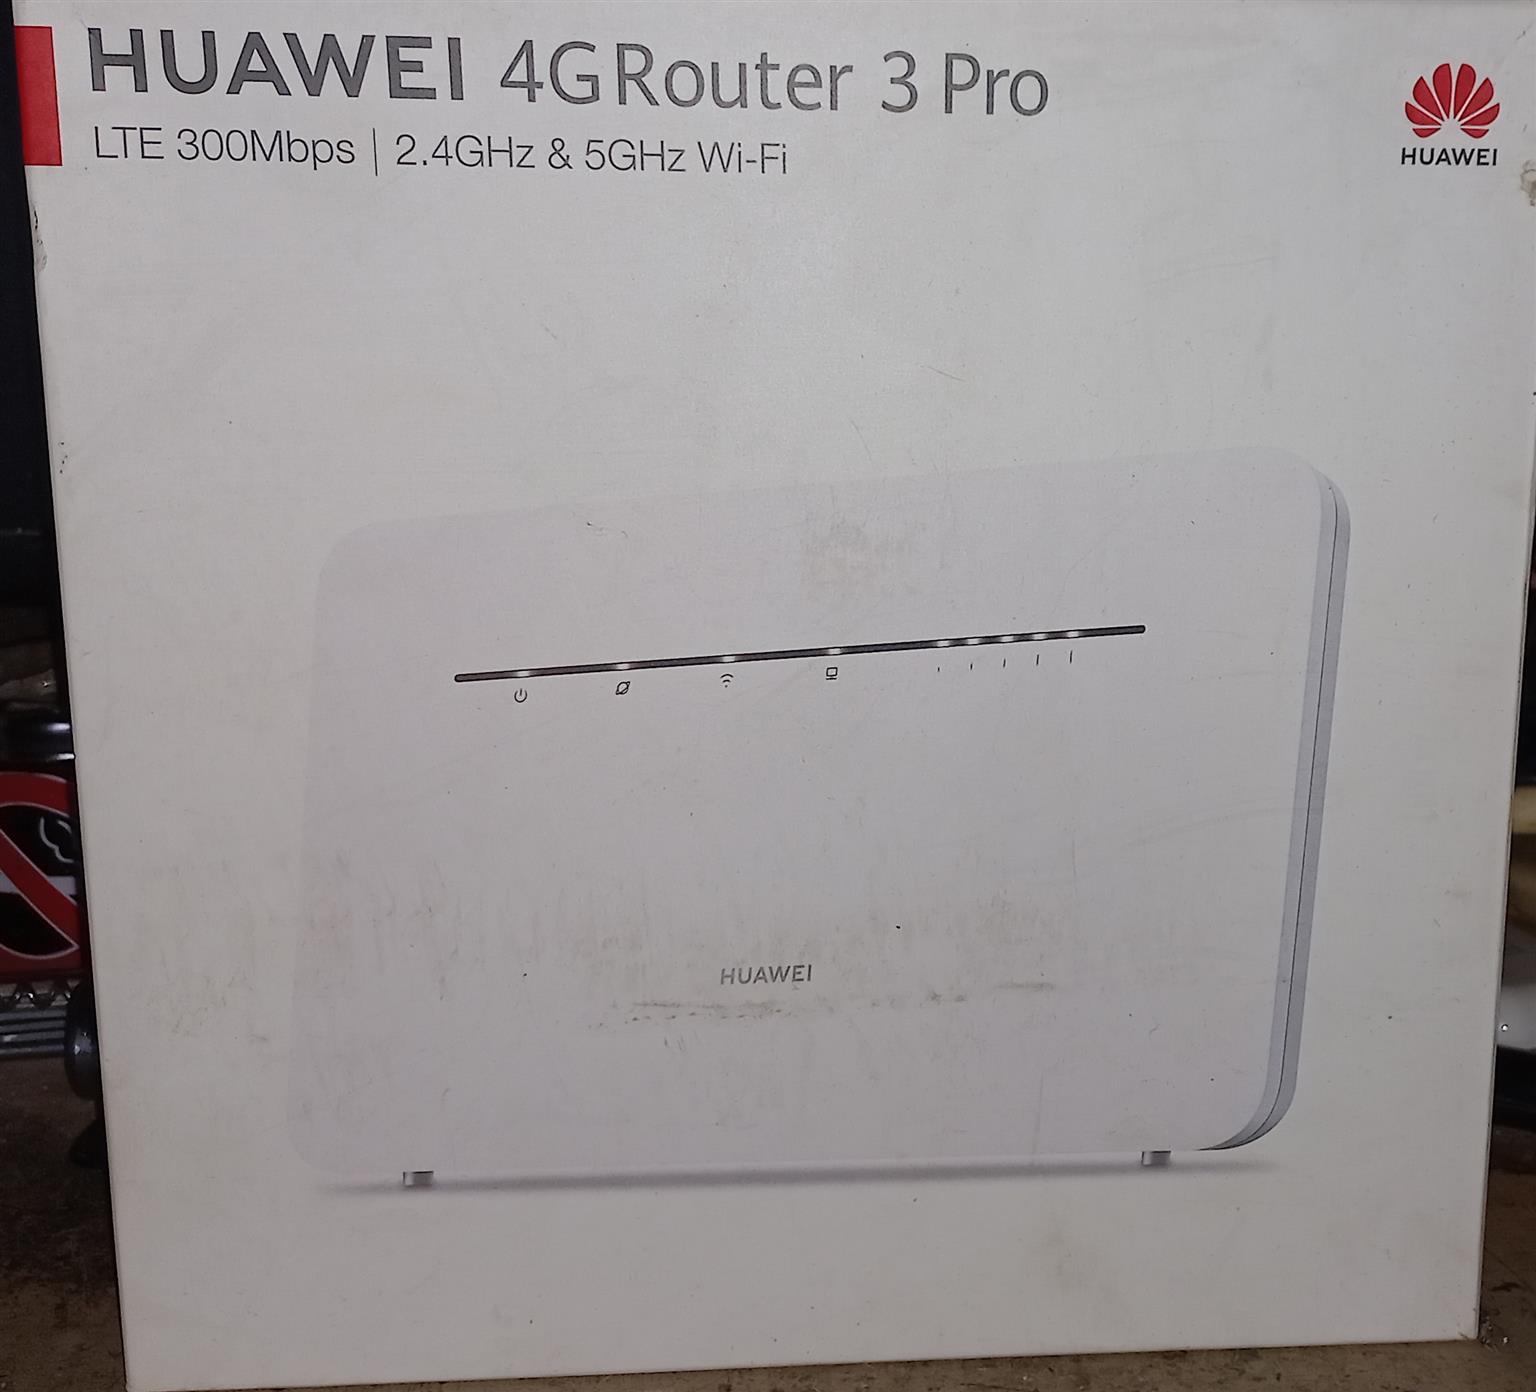 Huawei 4g router 3 pro for sale